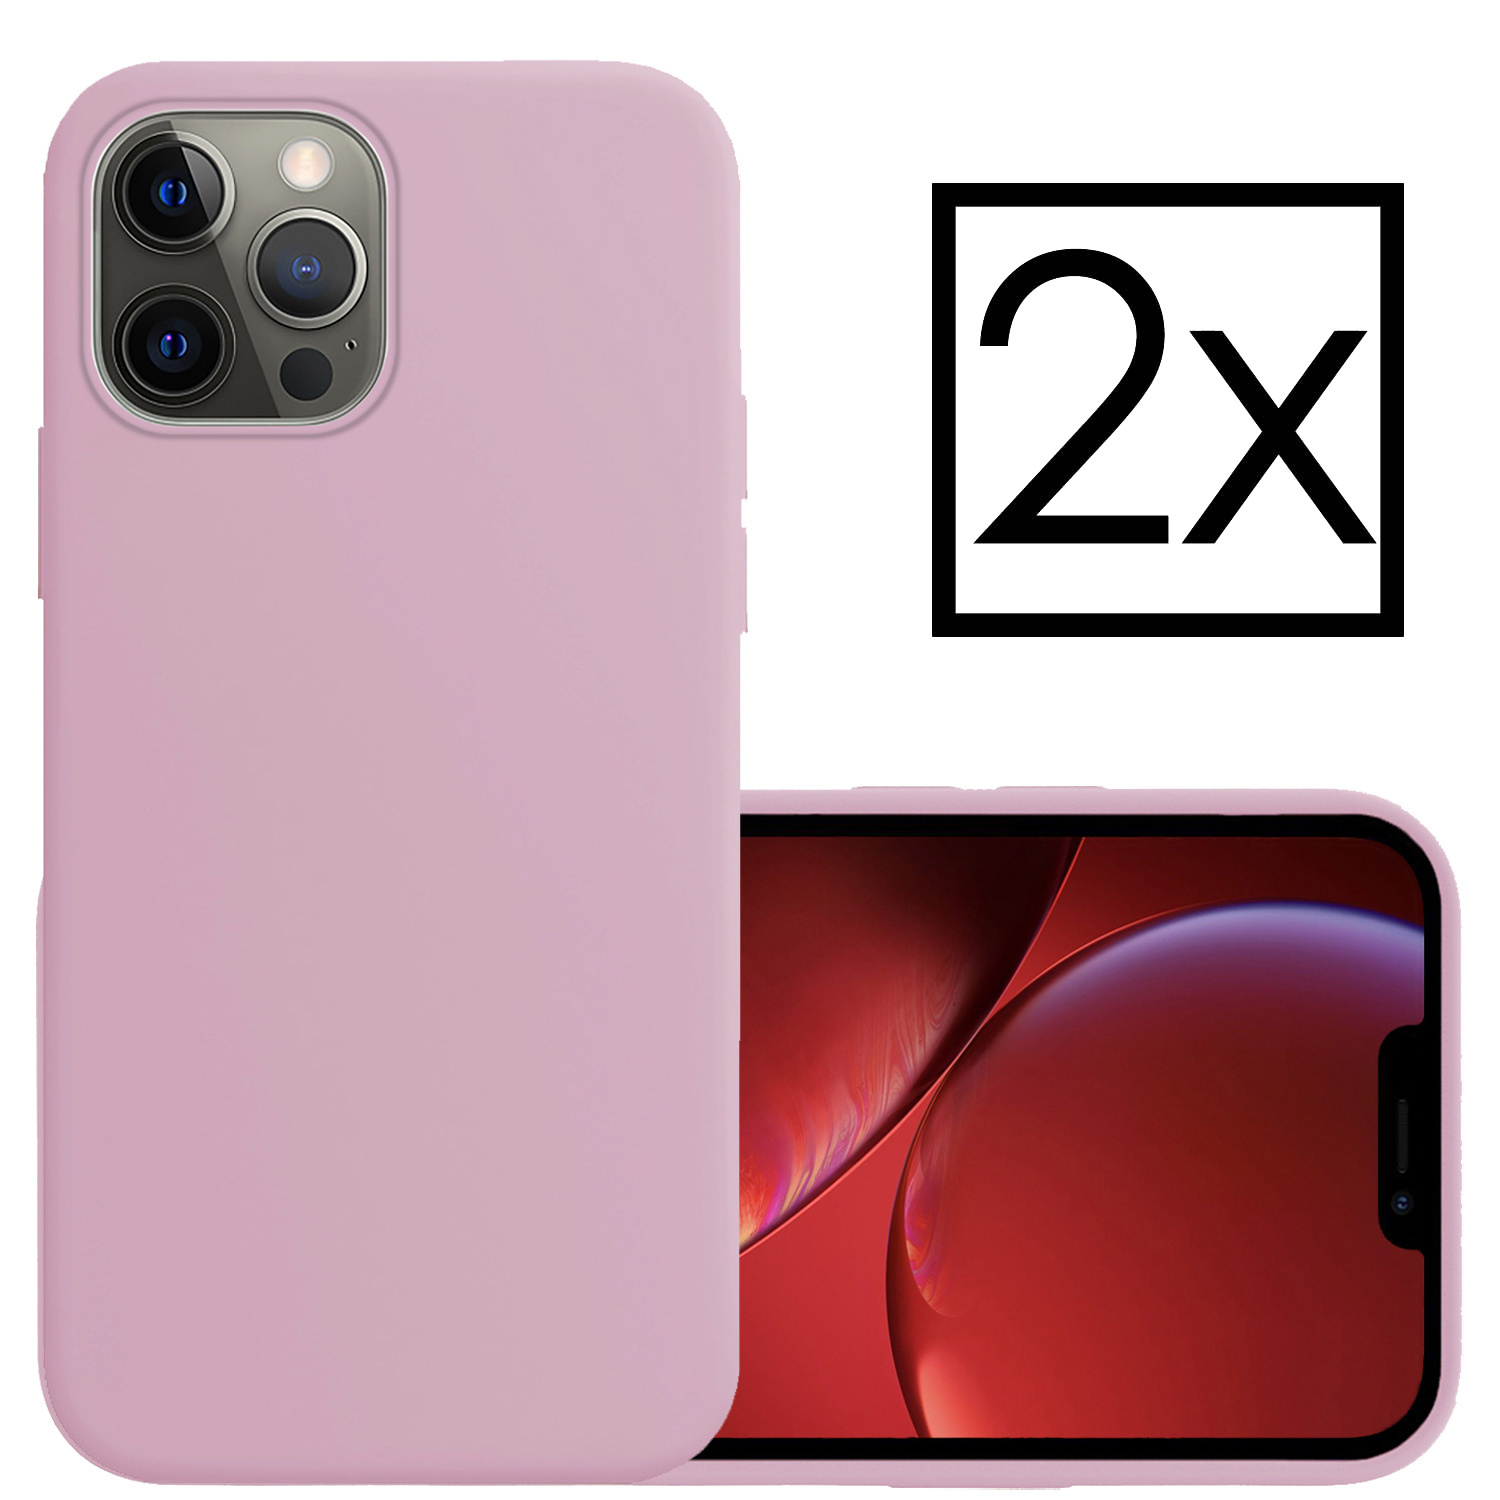 Hoes Geschikt voor iPhone 14 Pro Max Hoesje Cover Siliconen Back Case Hoes - Lila - 2x